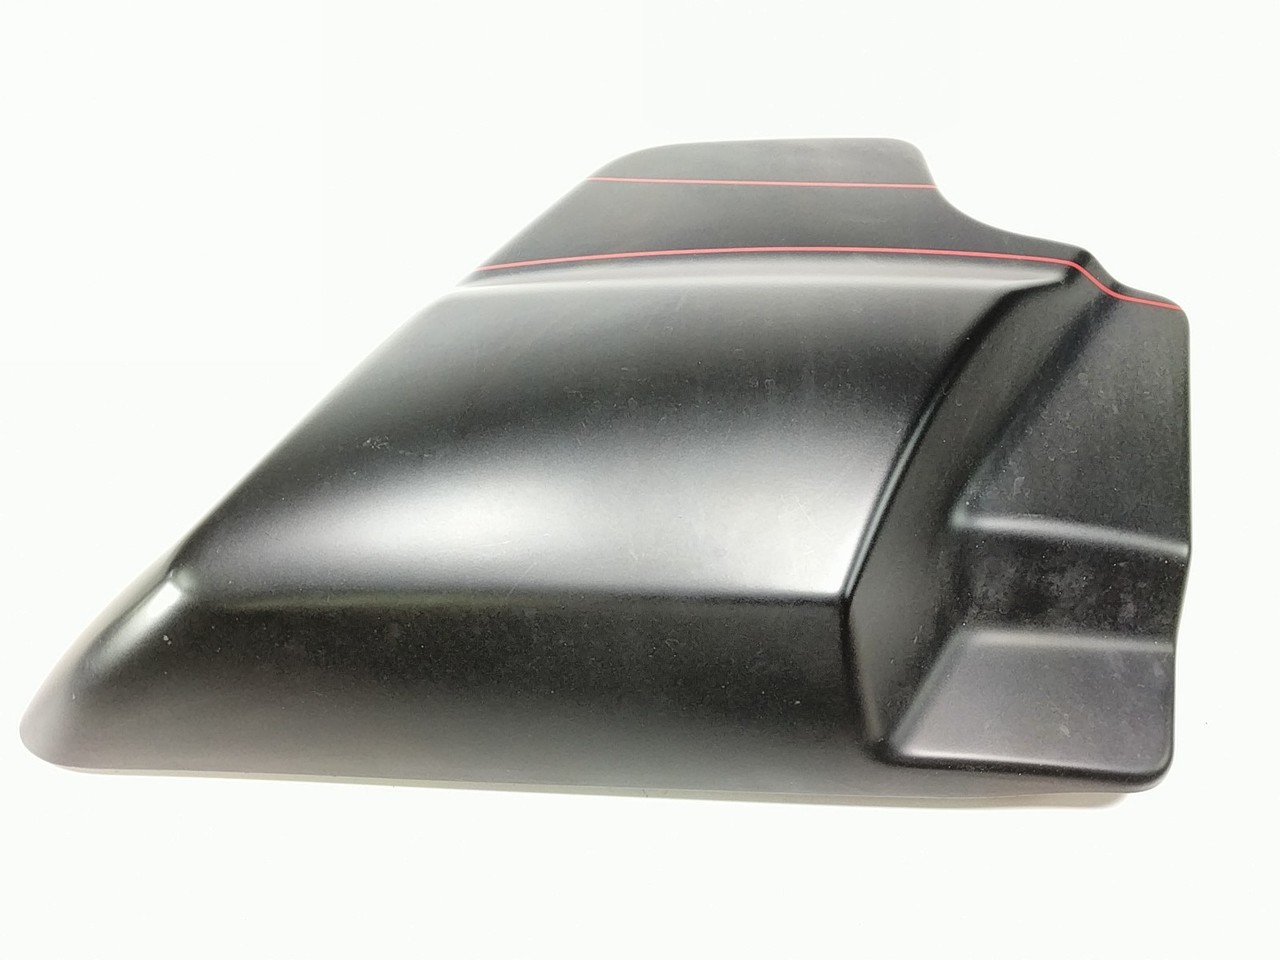 10 Harley Davidson FLTRX Road Glide Right Side Touring Fairing Cover 66048-09